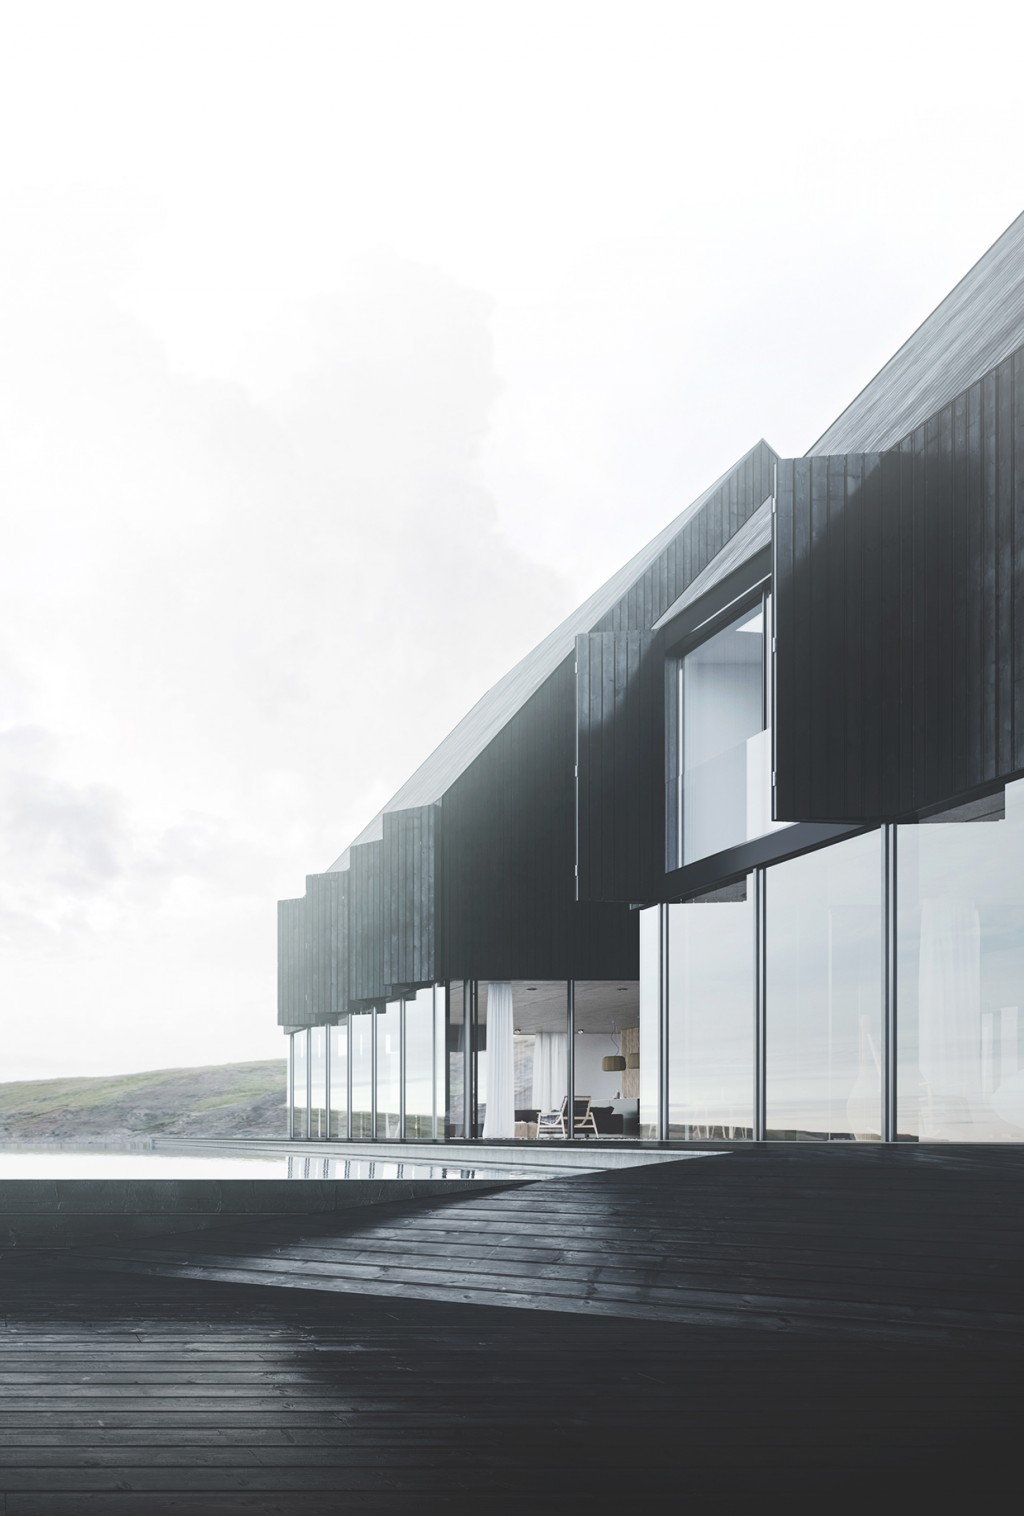 Minimal Architecture on a Solitary Iceland Landscape